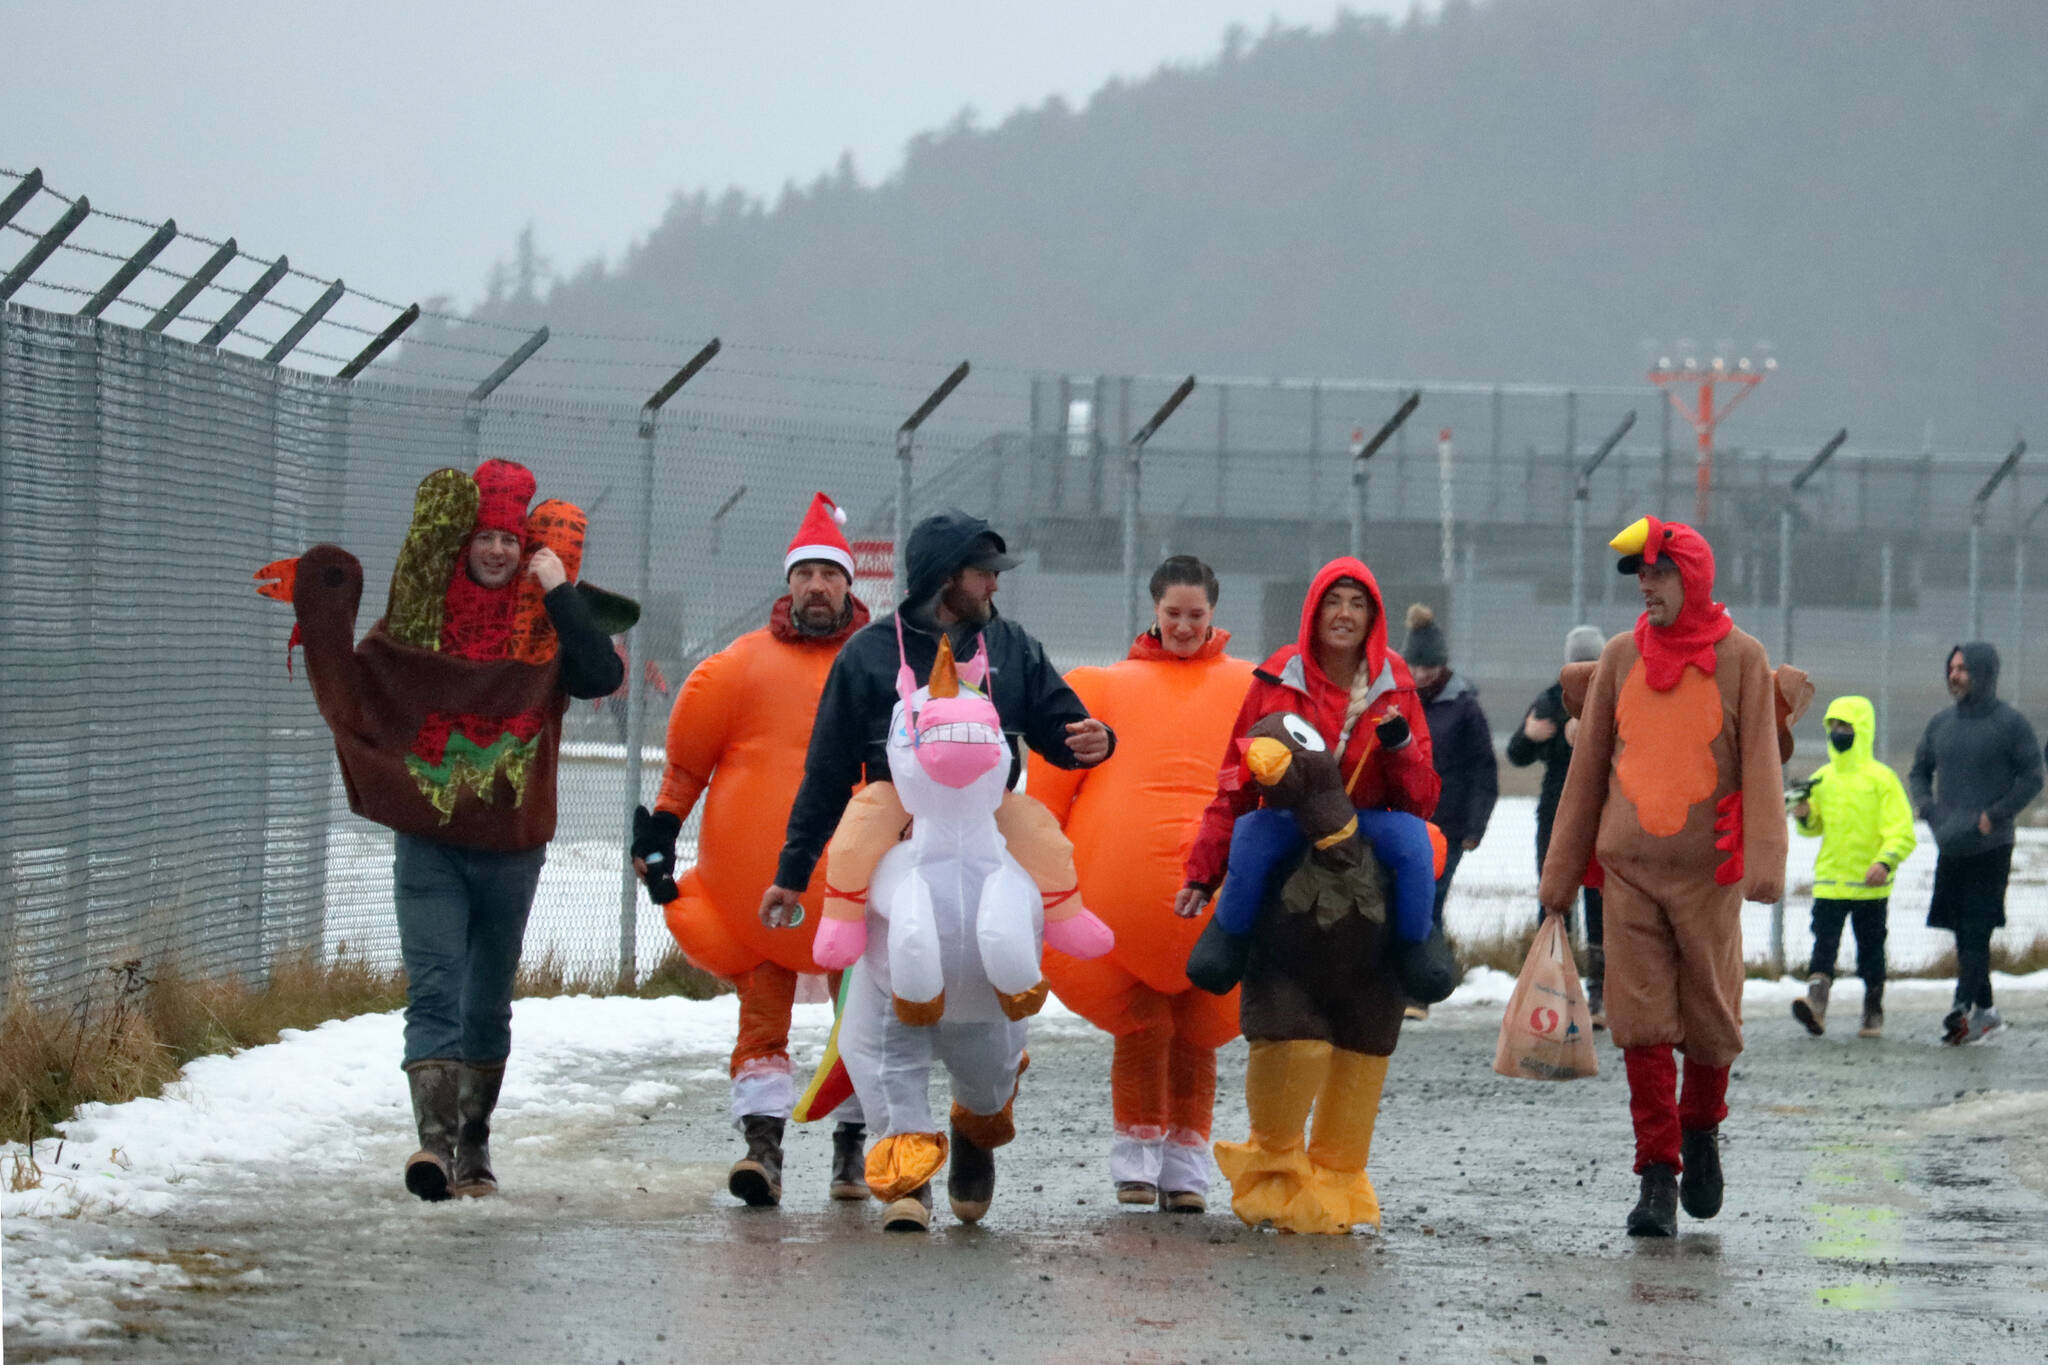 Matthew Wendel, Mike Kreis, Kasey Watts, Courtney Kreis, Tami Wahto and Todd Schur wore costumes during the 2021 Turkey Trot. Why’d they wear costumes? “Why not?” asked Schur. (Ben Hohenstatt / Juneau Empire File)